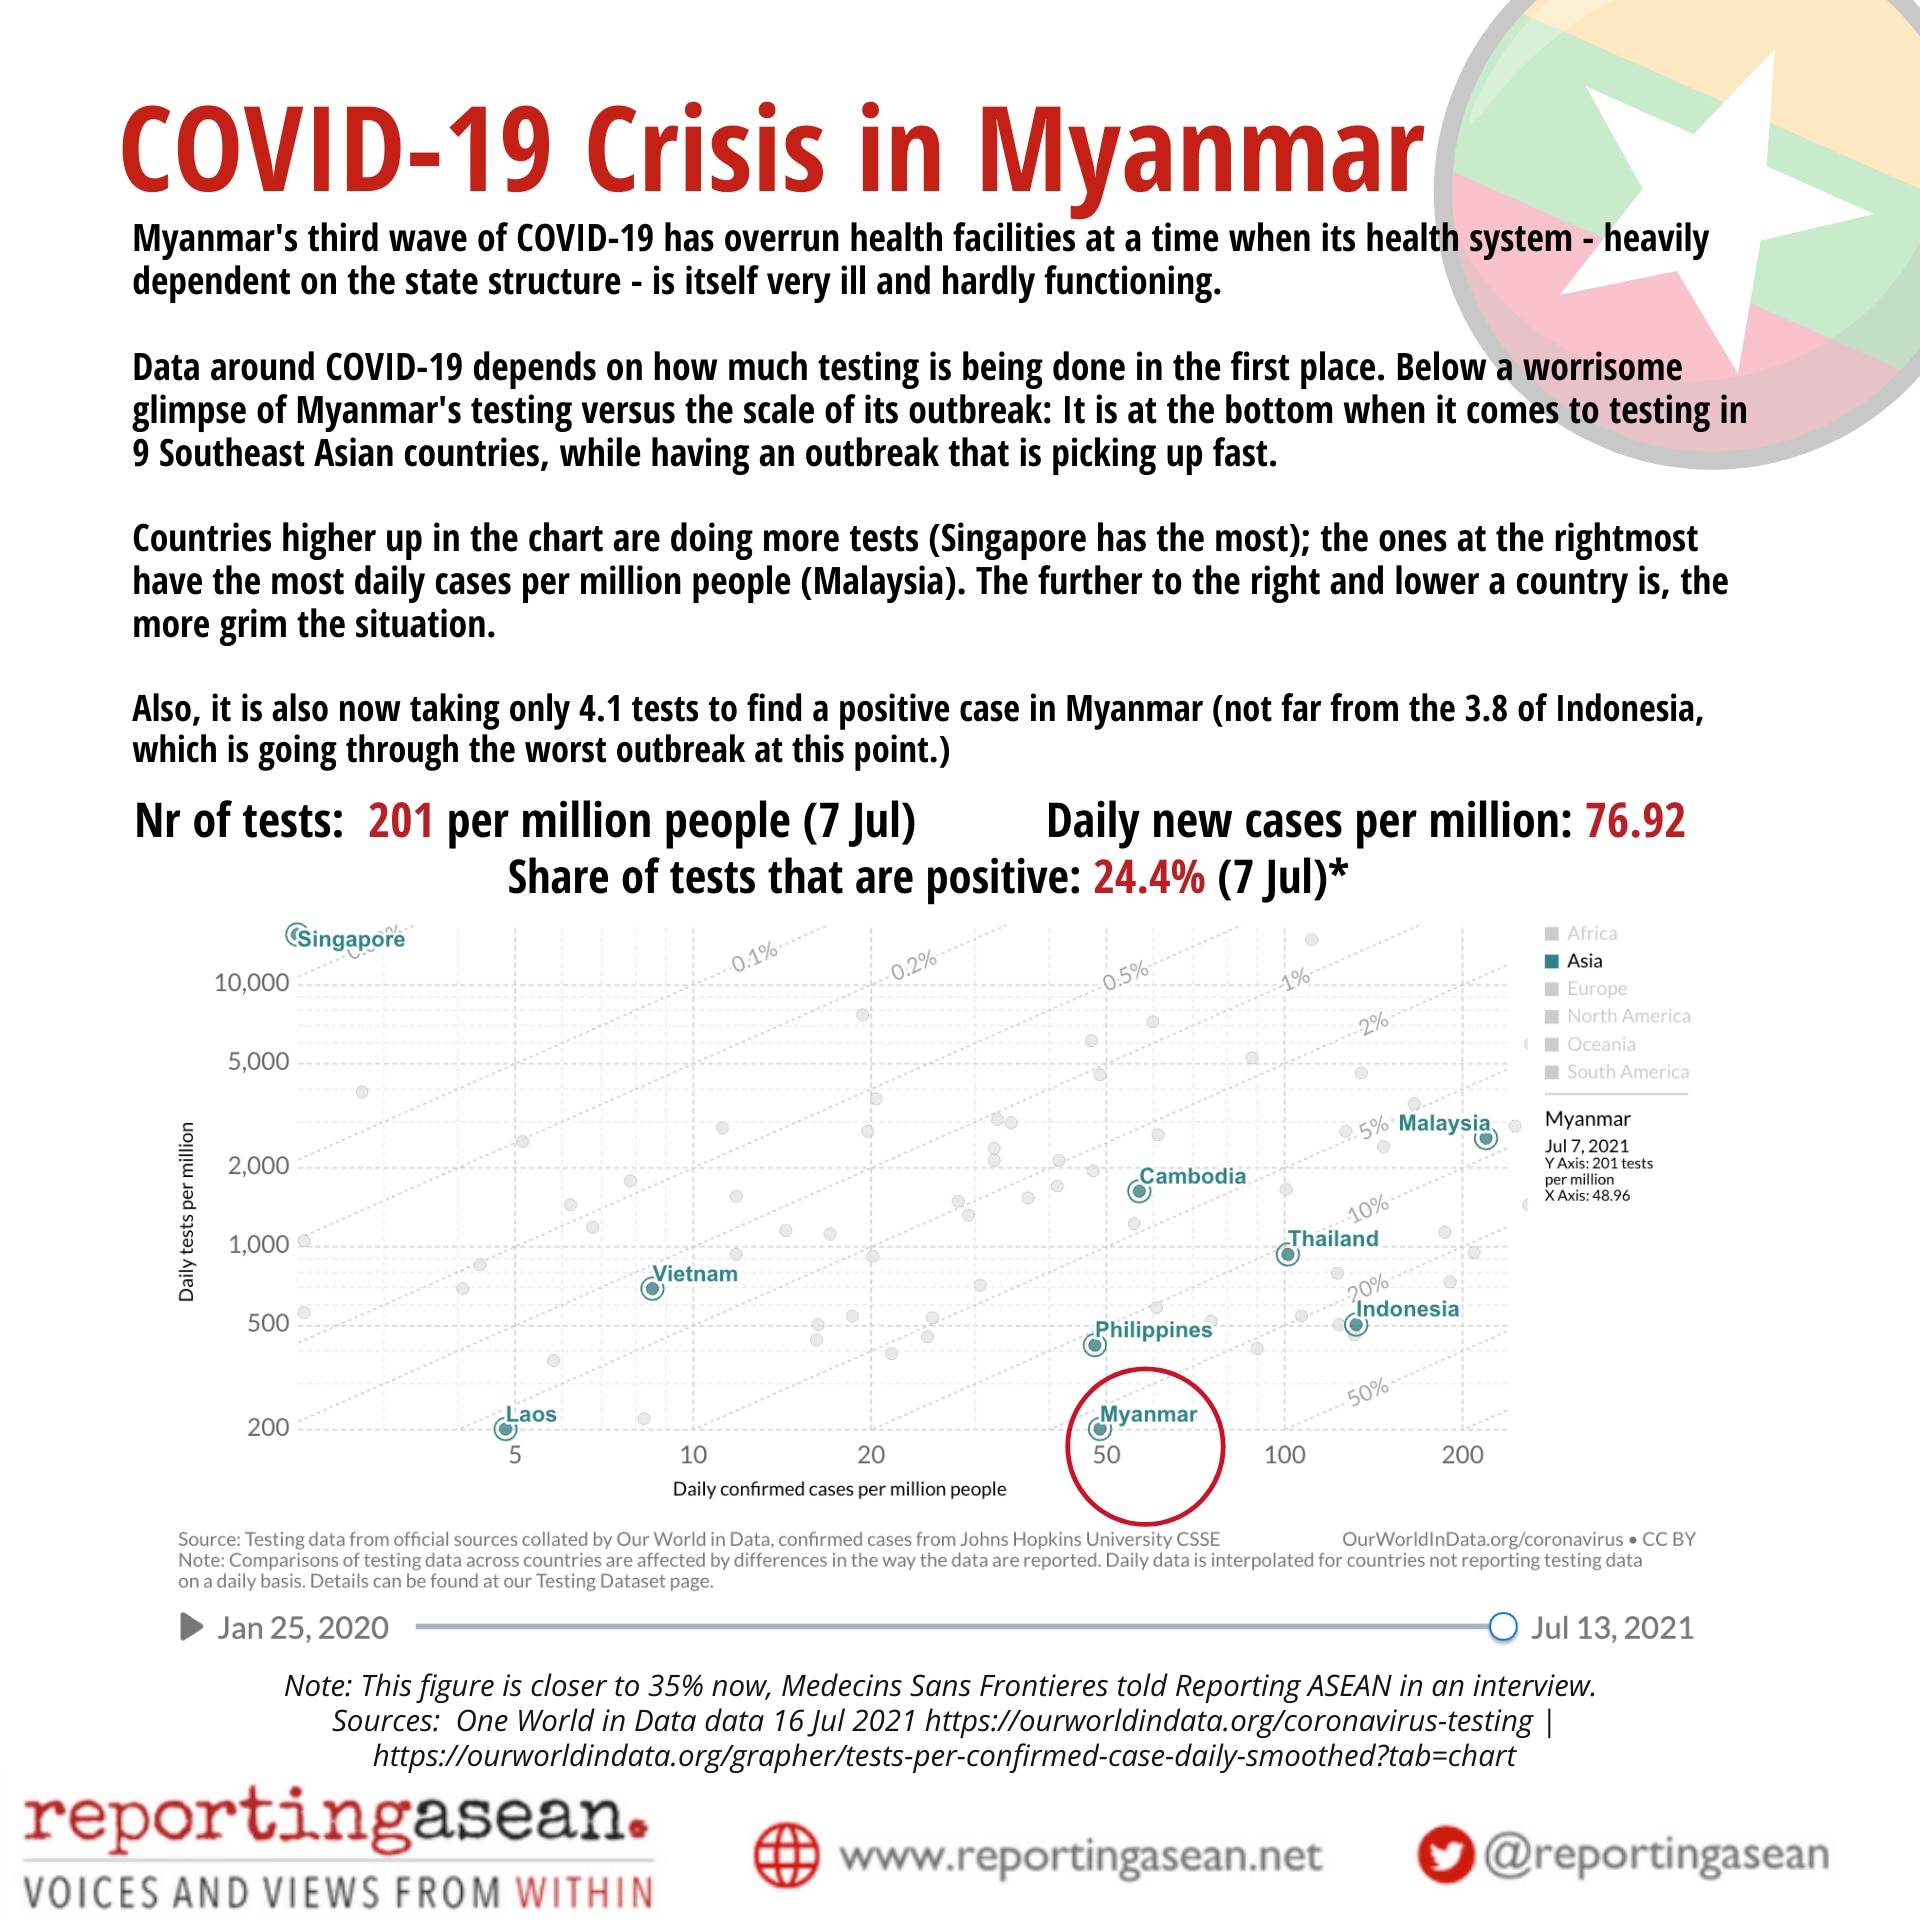 Myanmar: ’The situation could become critical in weeks’ 4